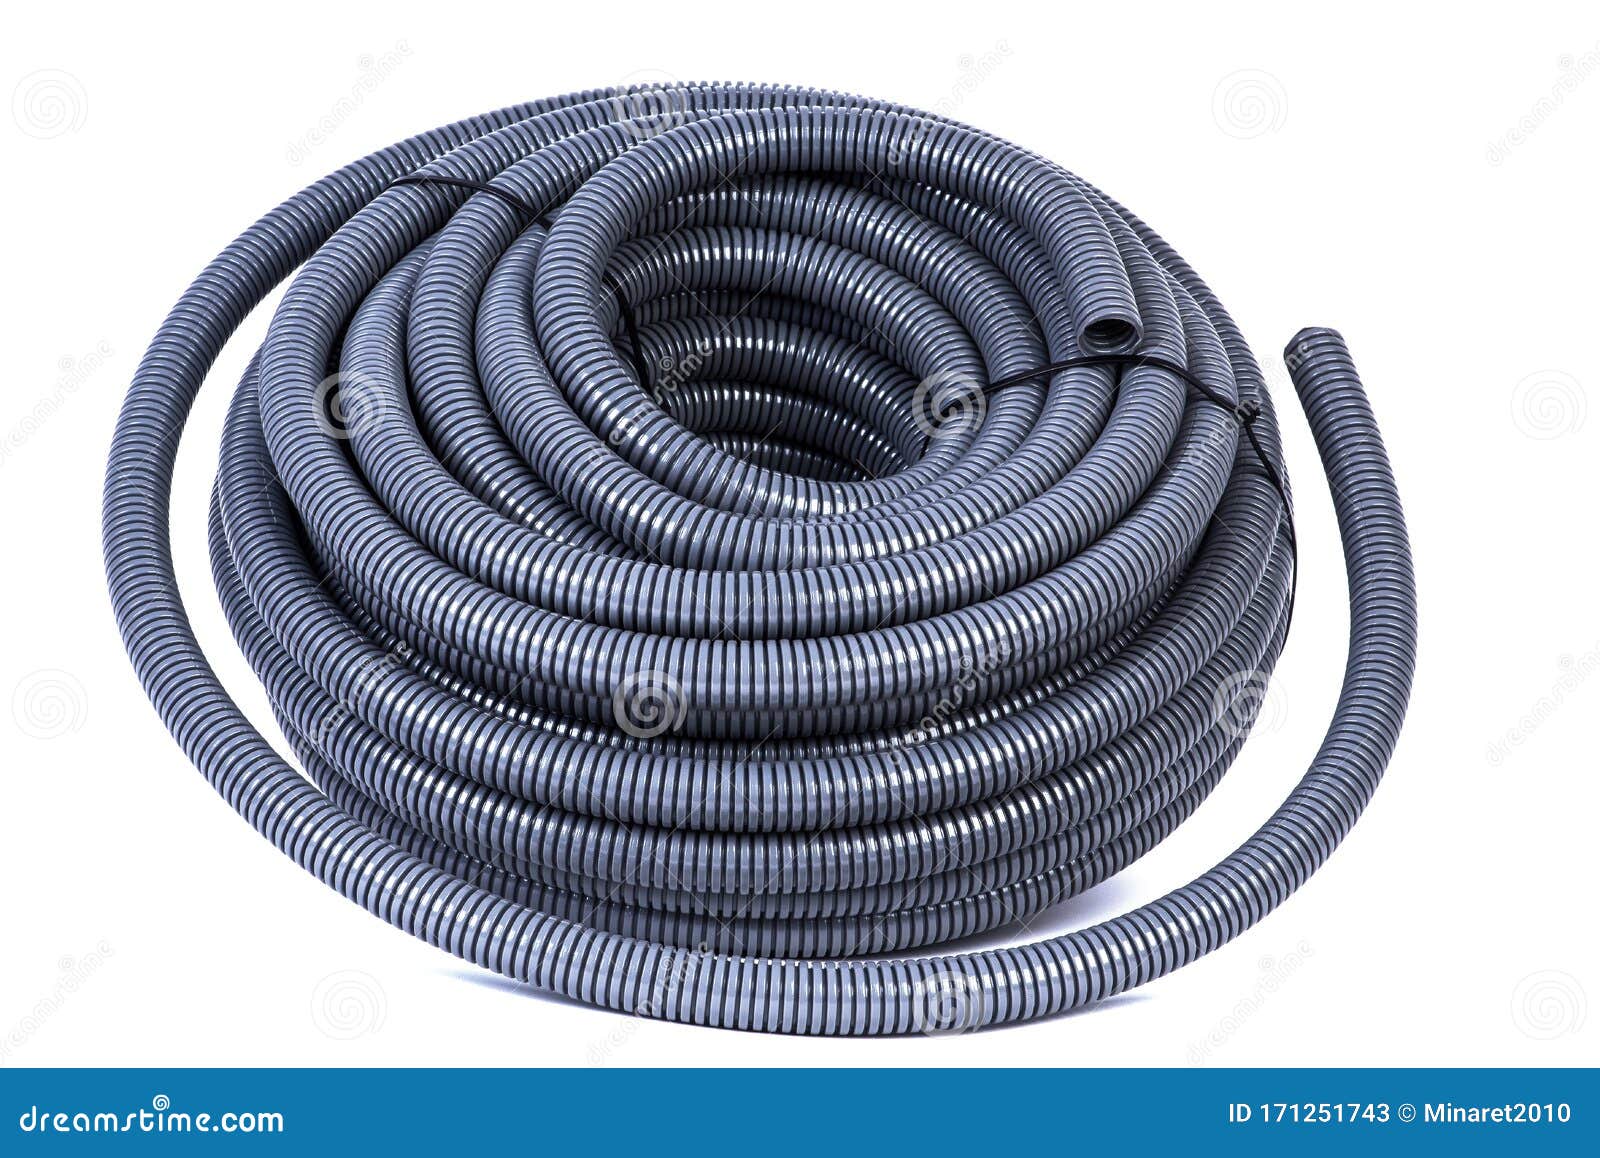 What Is A Flexible Electrical Conduit?